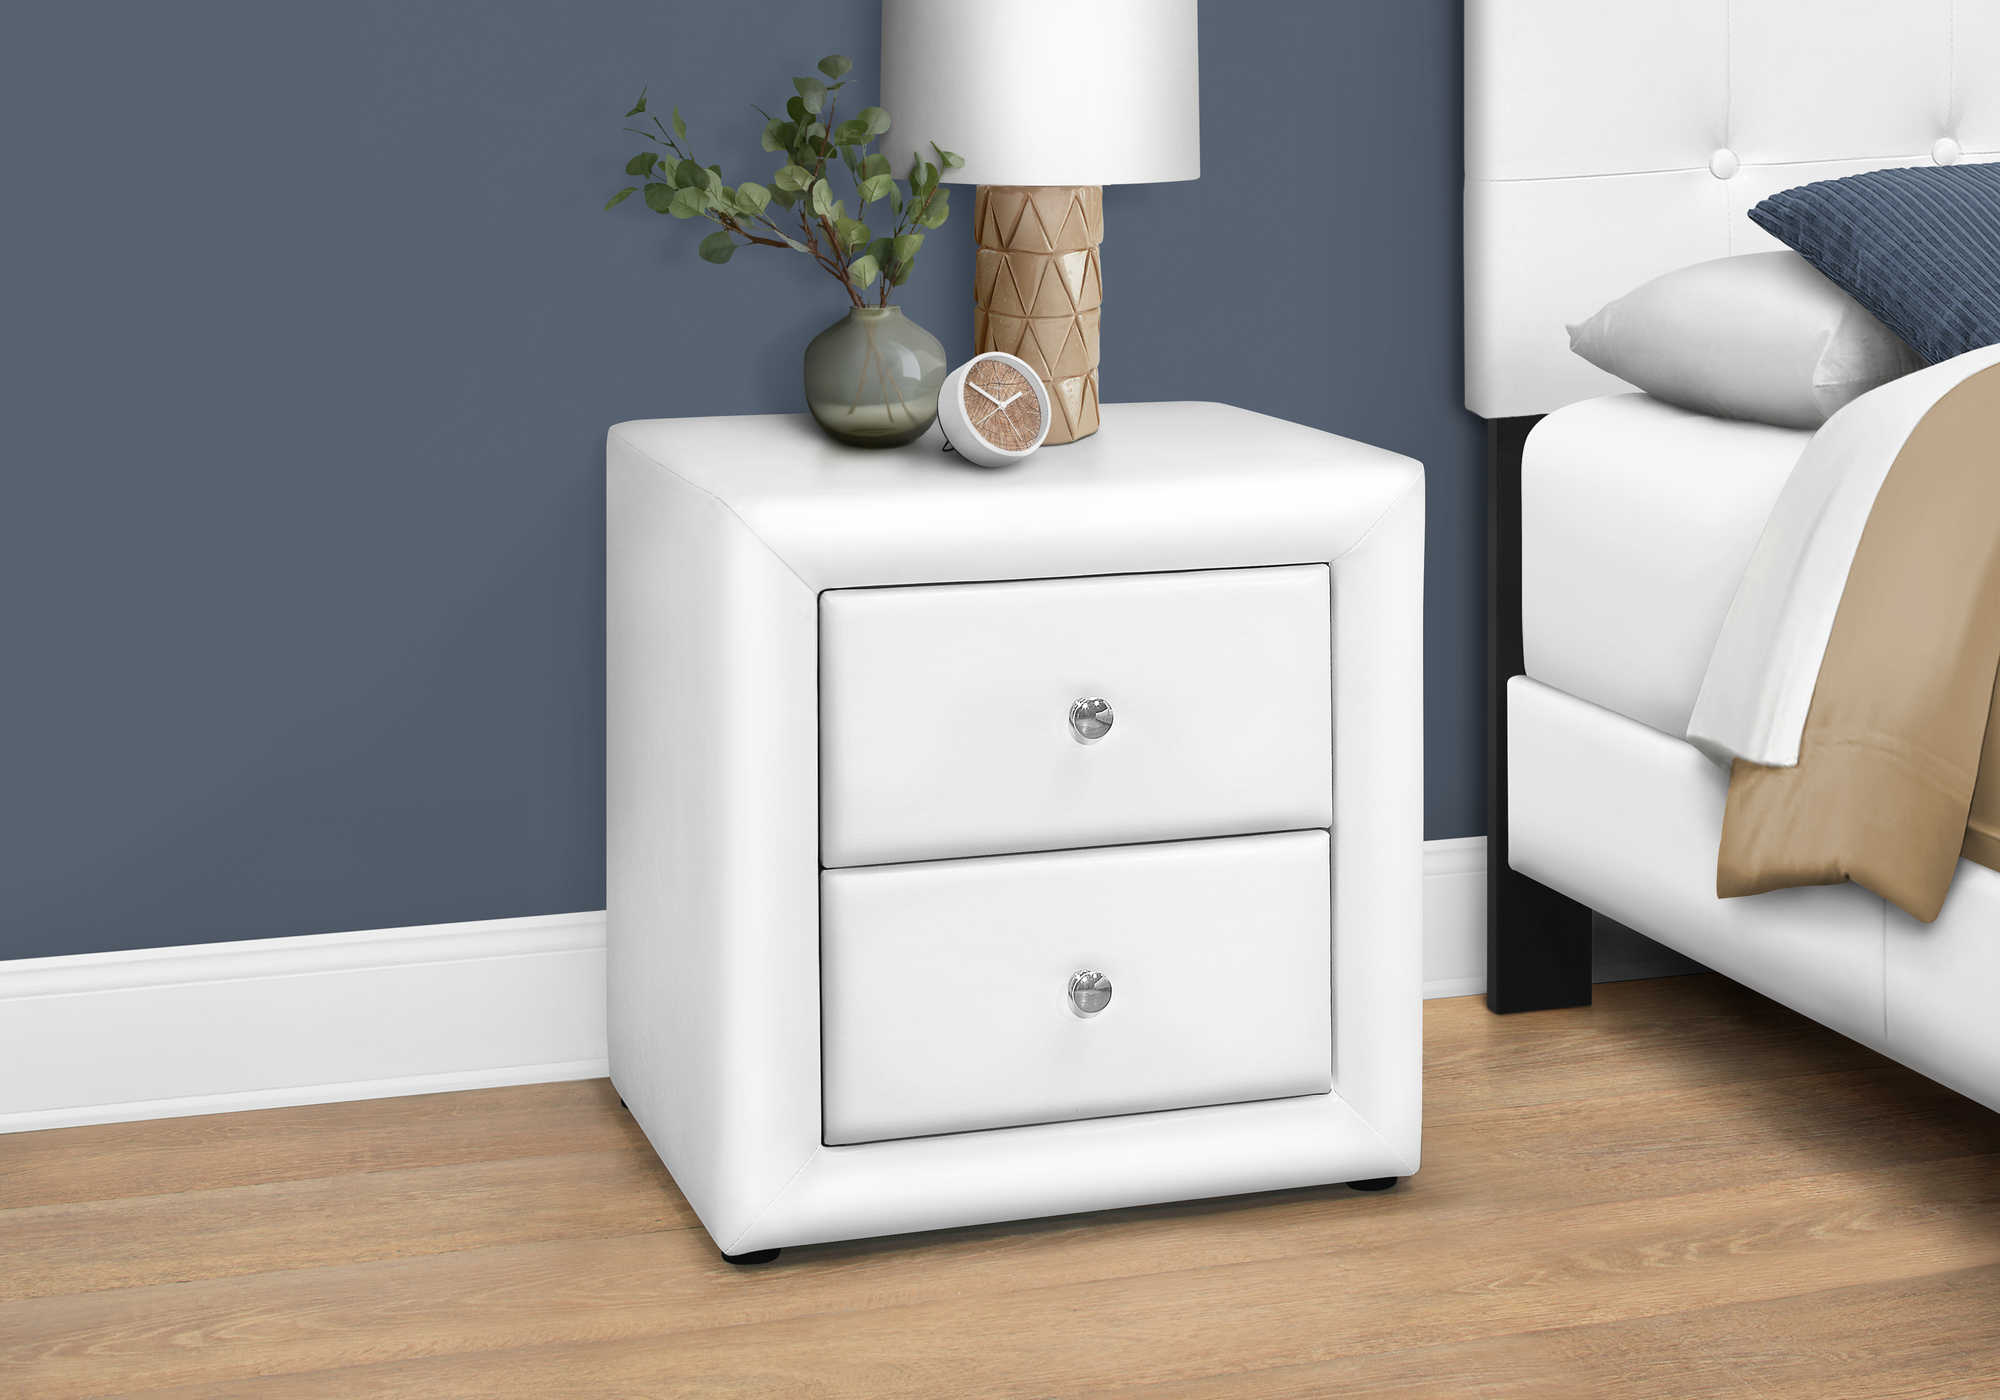 BEDROOM ACCENT - 21"H / WHITE LEATHER-LOOK NIGHT STAND